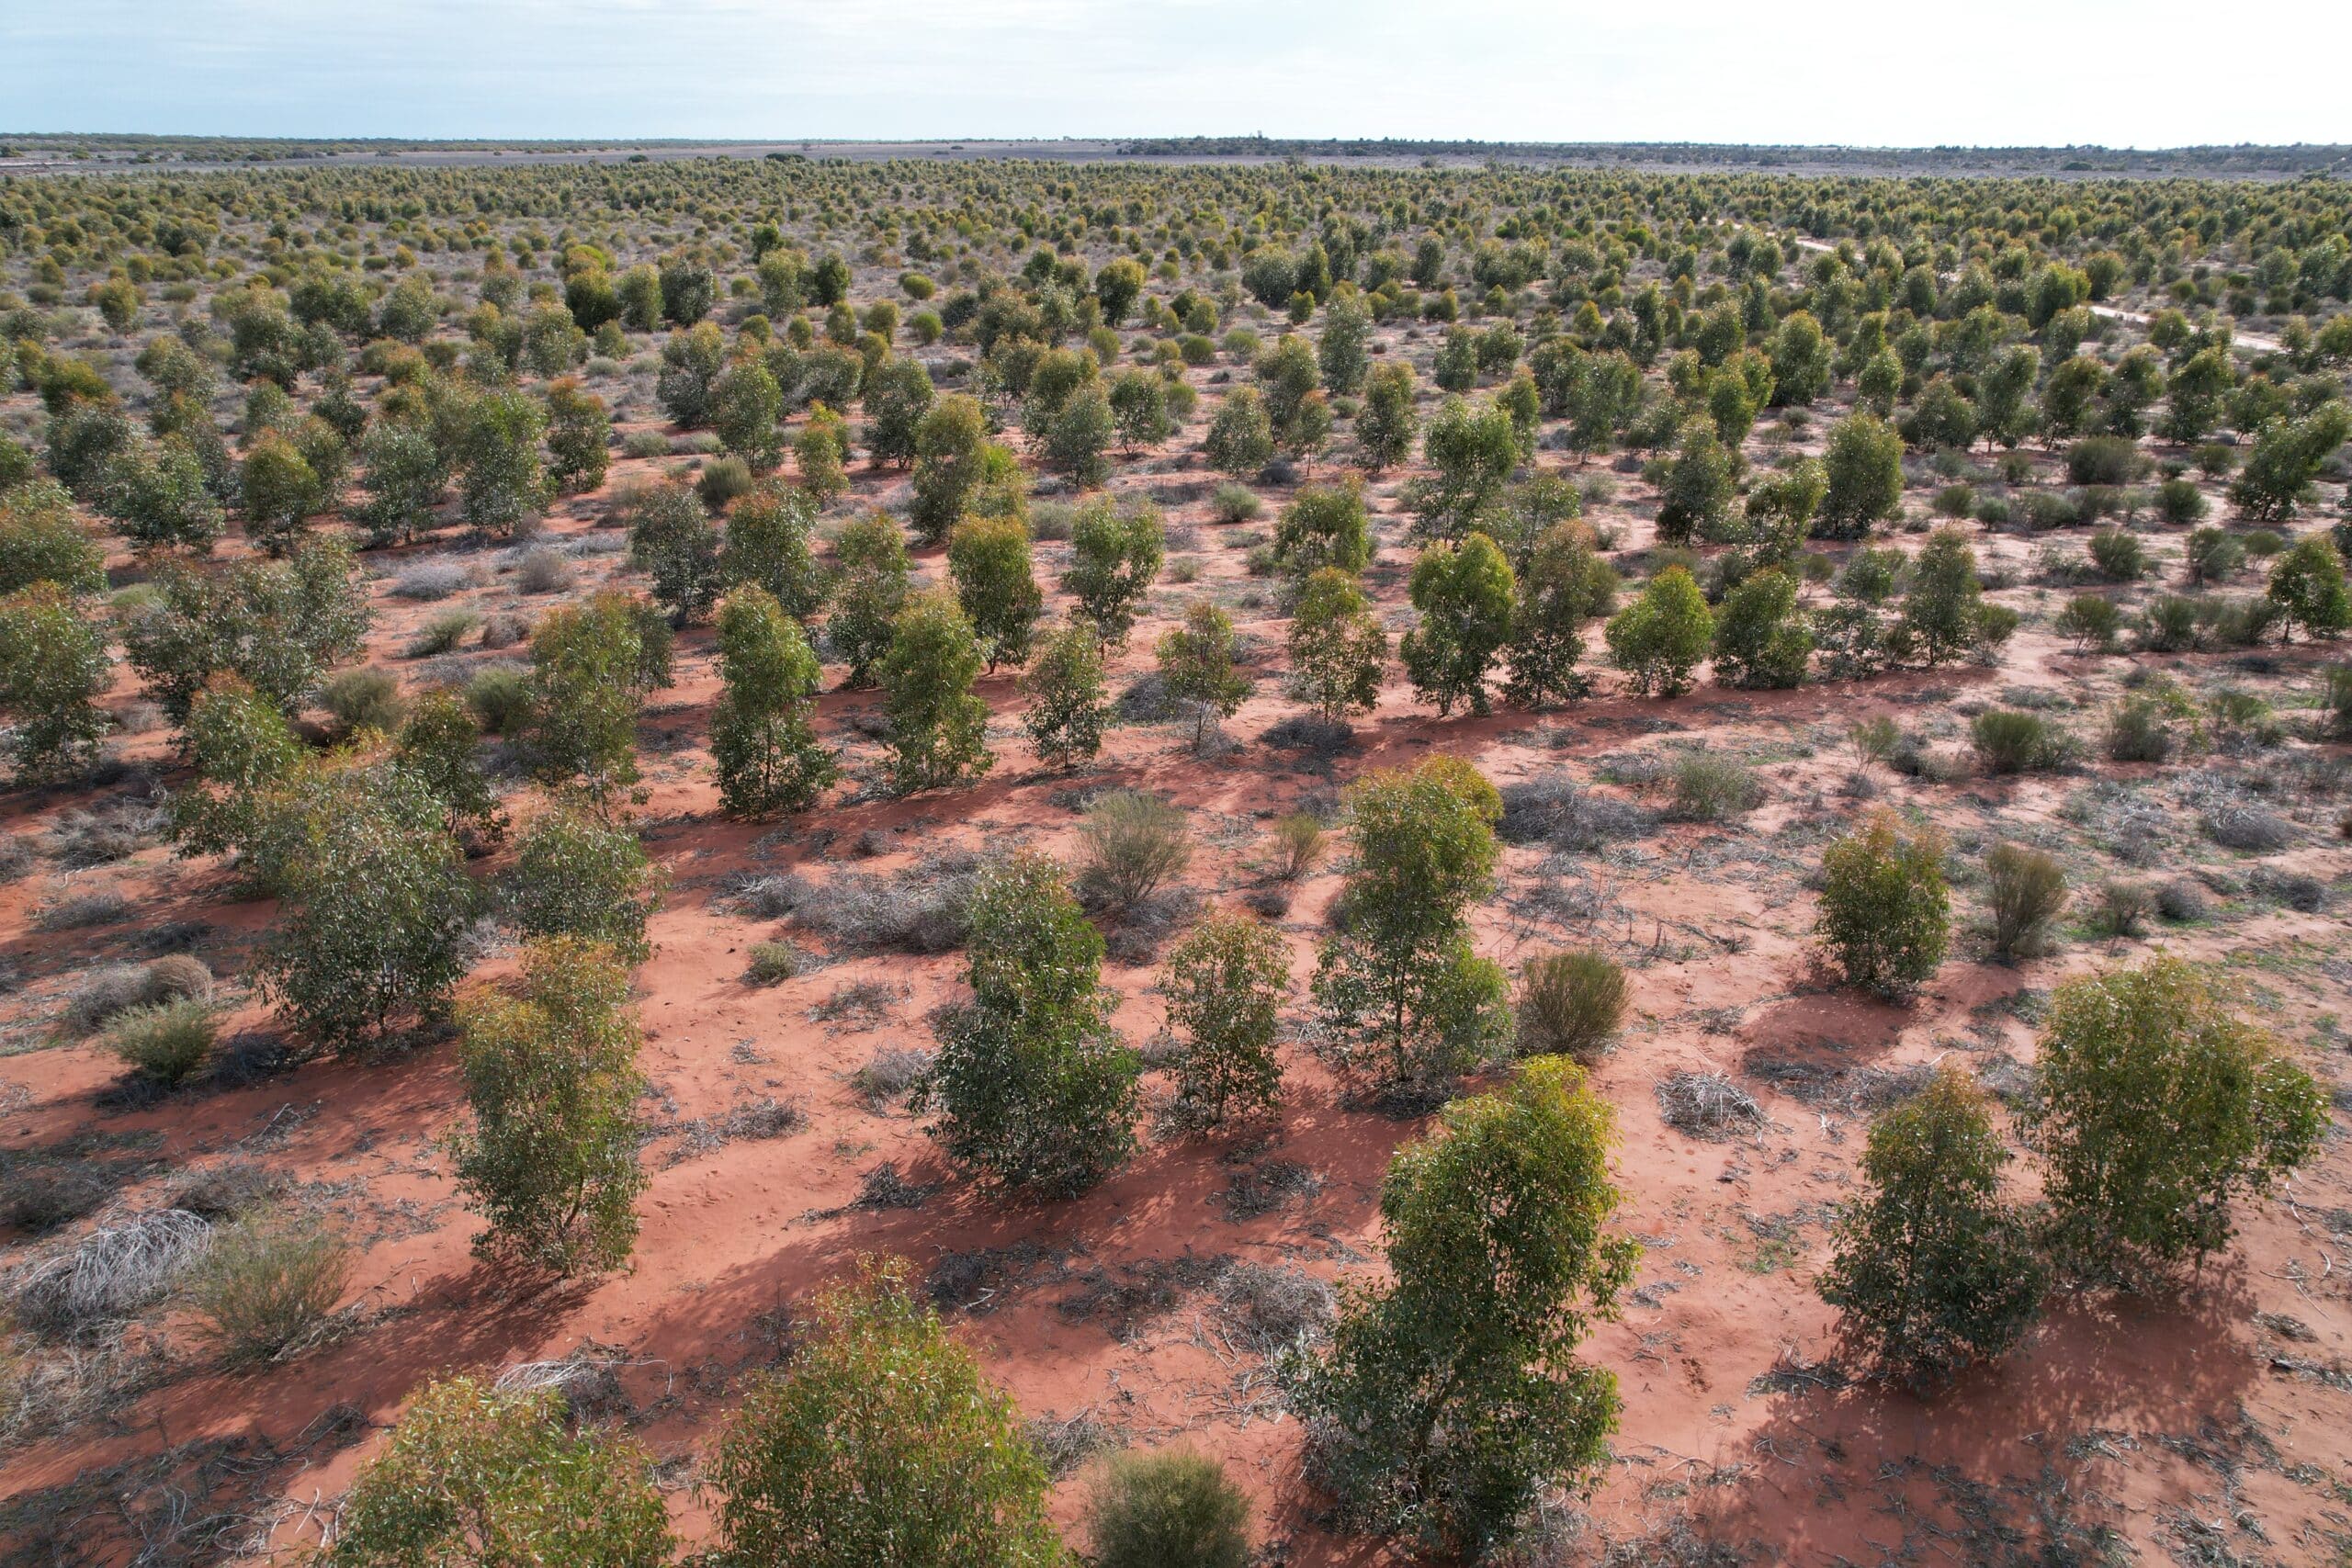 Drone photo of trees planted in rows of red dirt